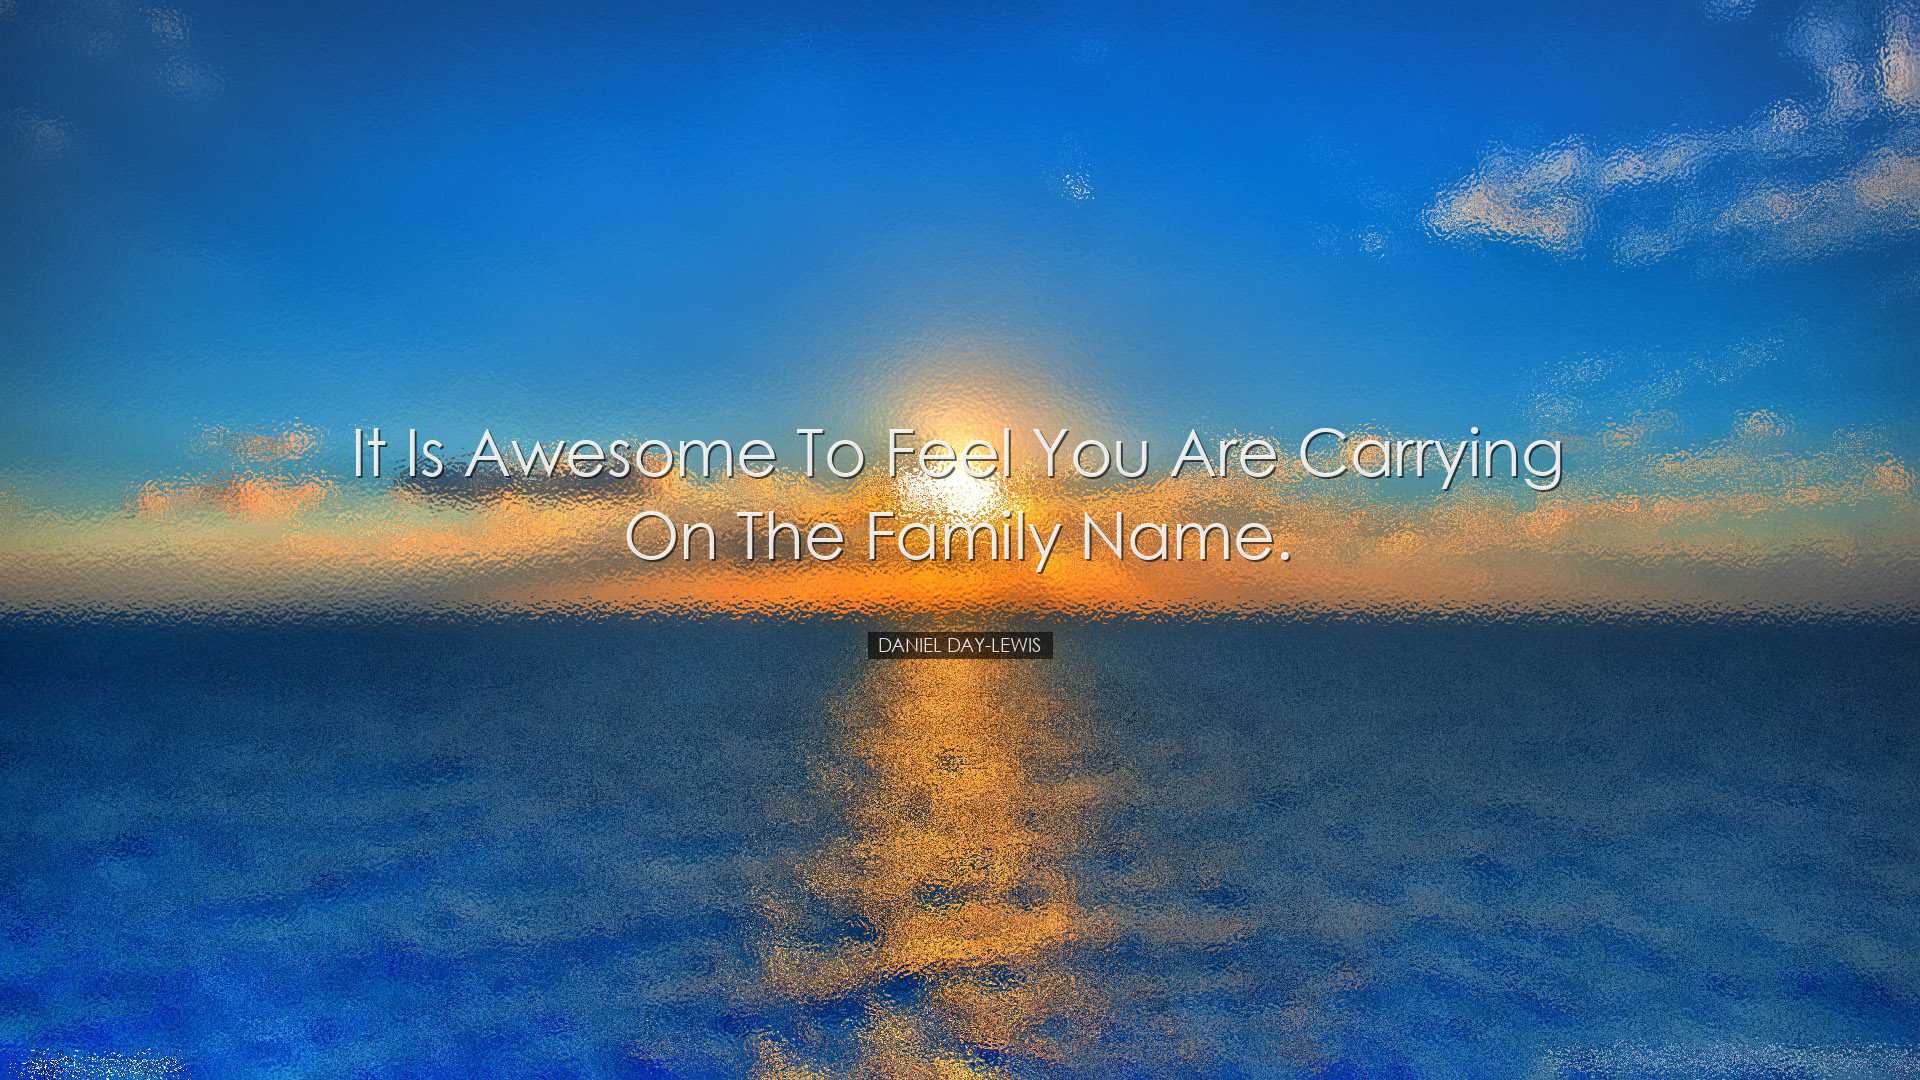 It is awesome to feel you are carrying on the family name. - Danie